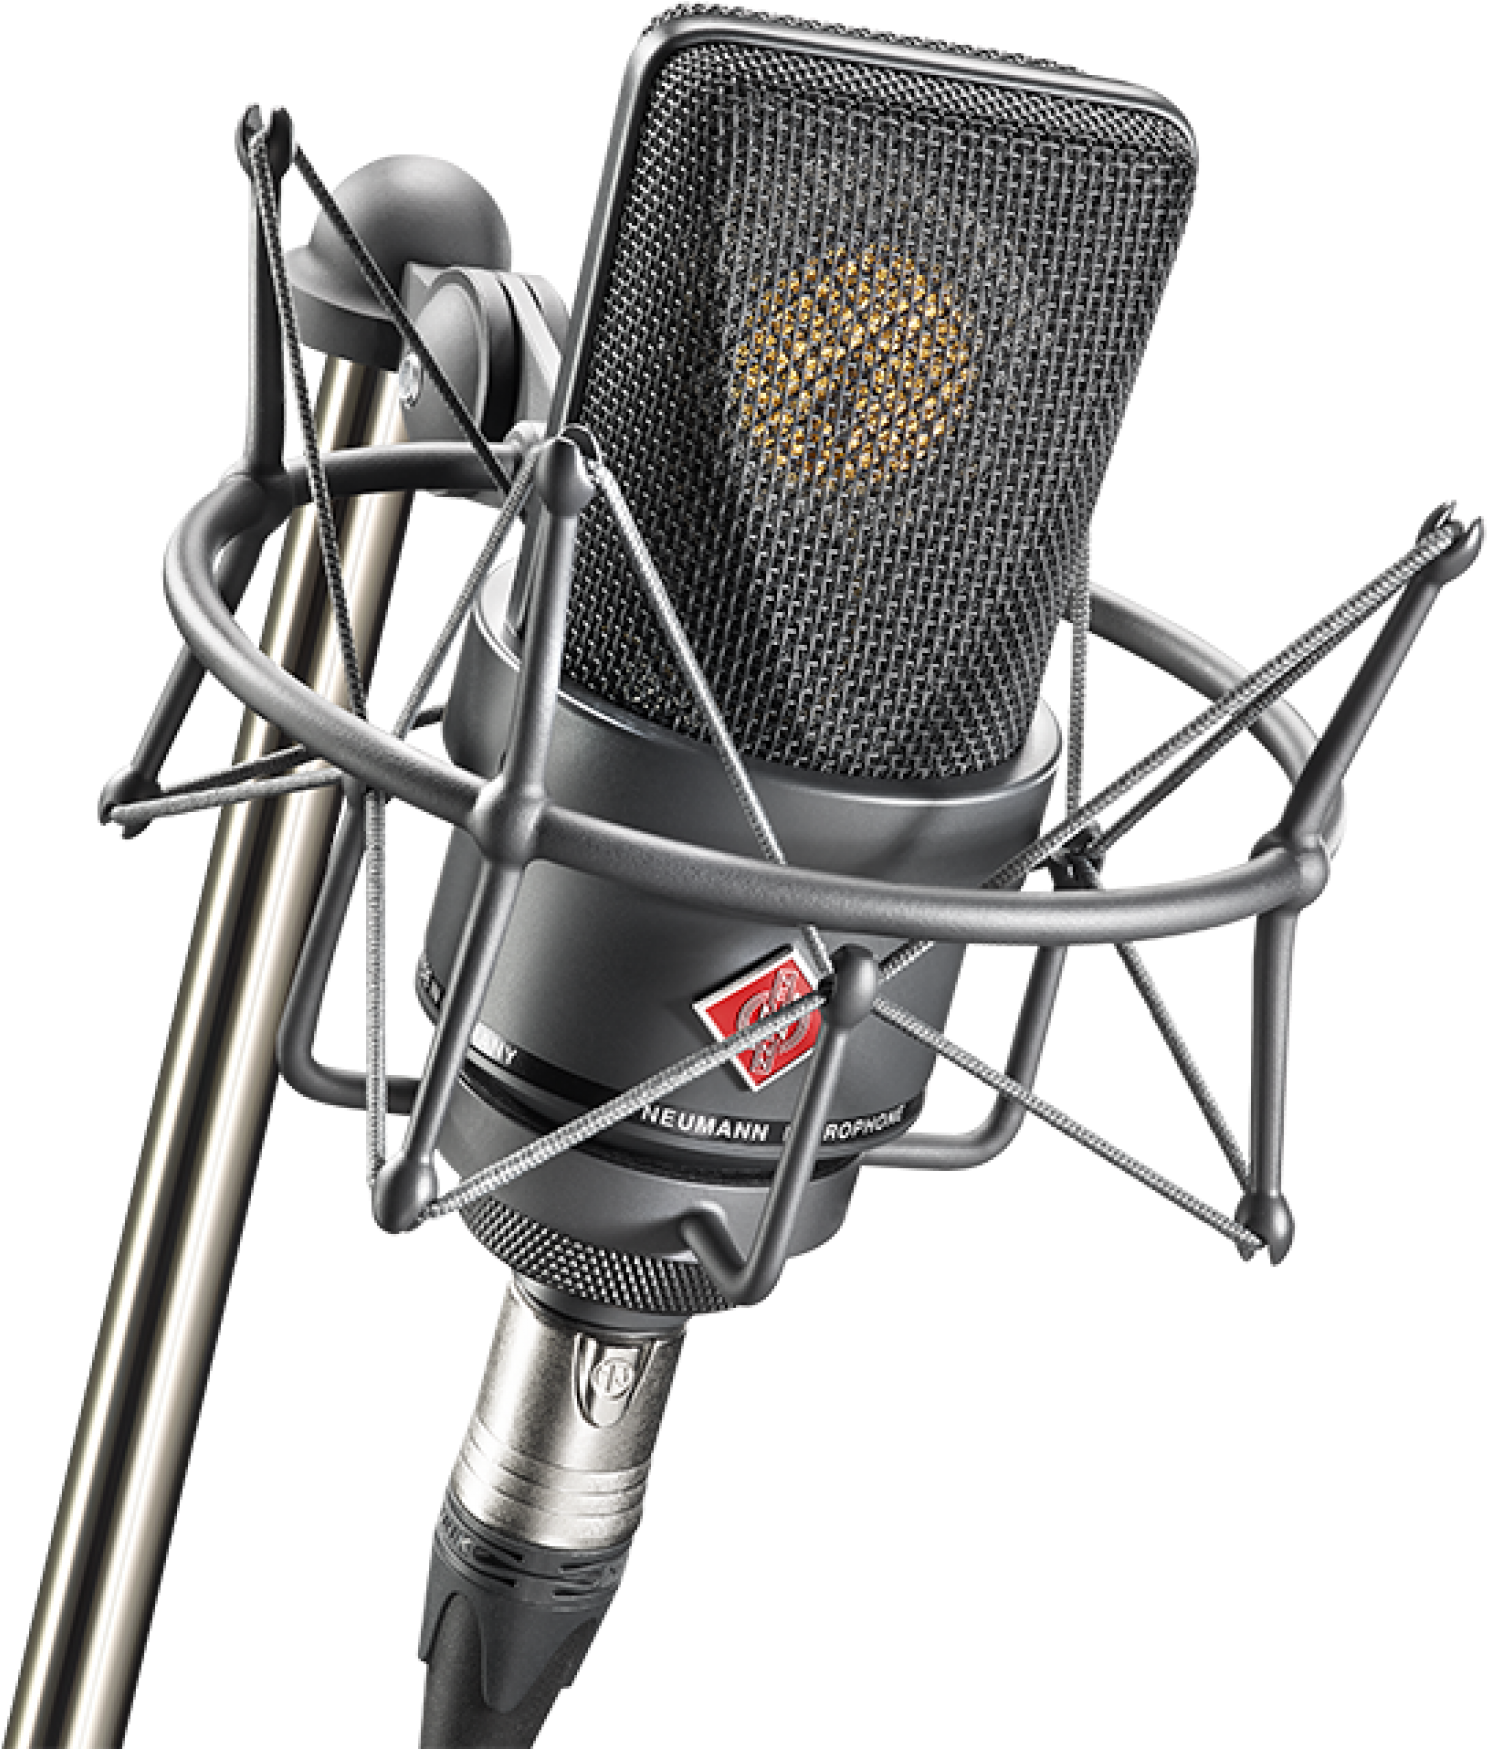 Professional Studio Microphoneon Stand PNG